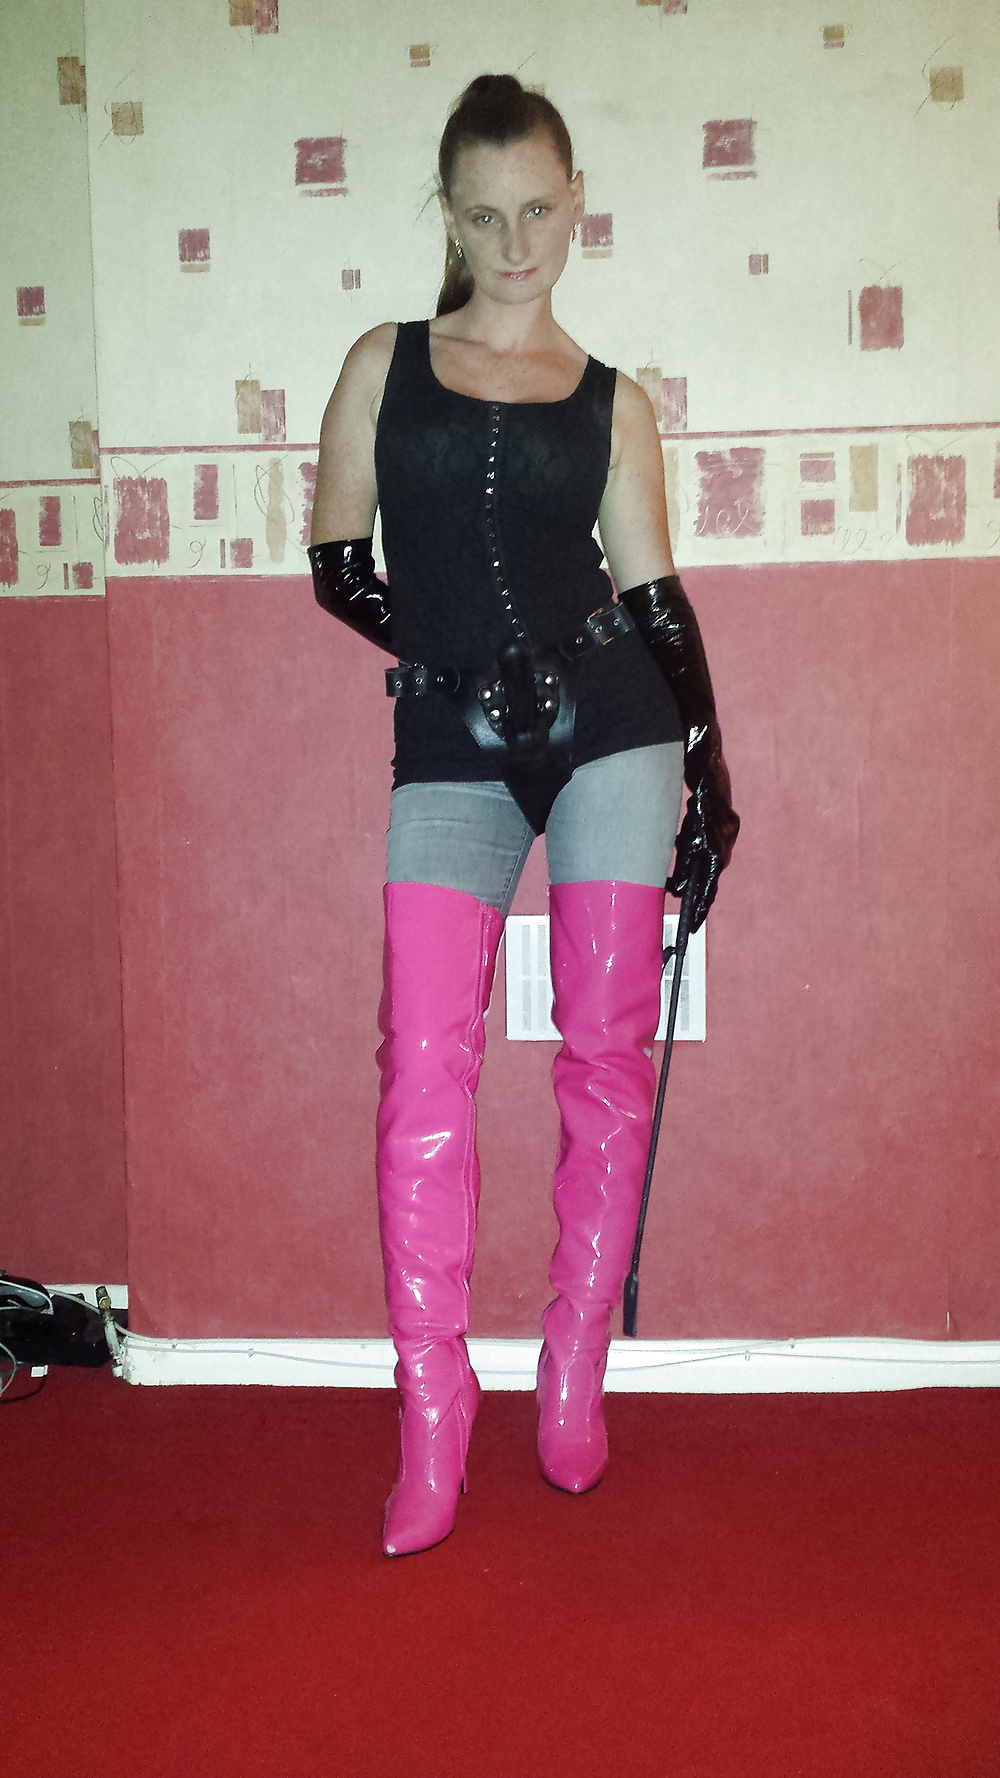 Strapon wearing mistress in pink thigh high boots #30016226